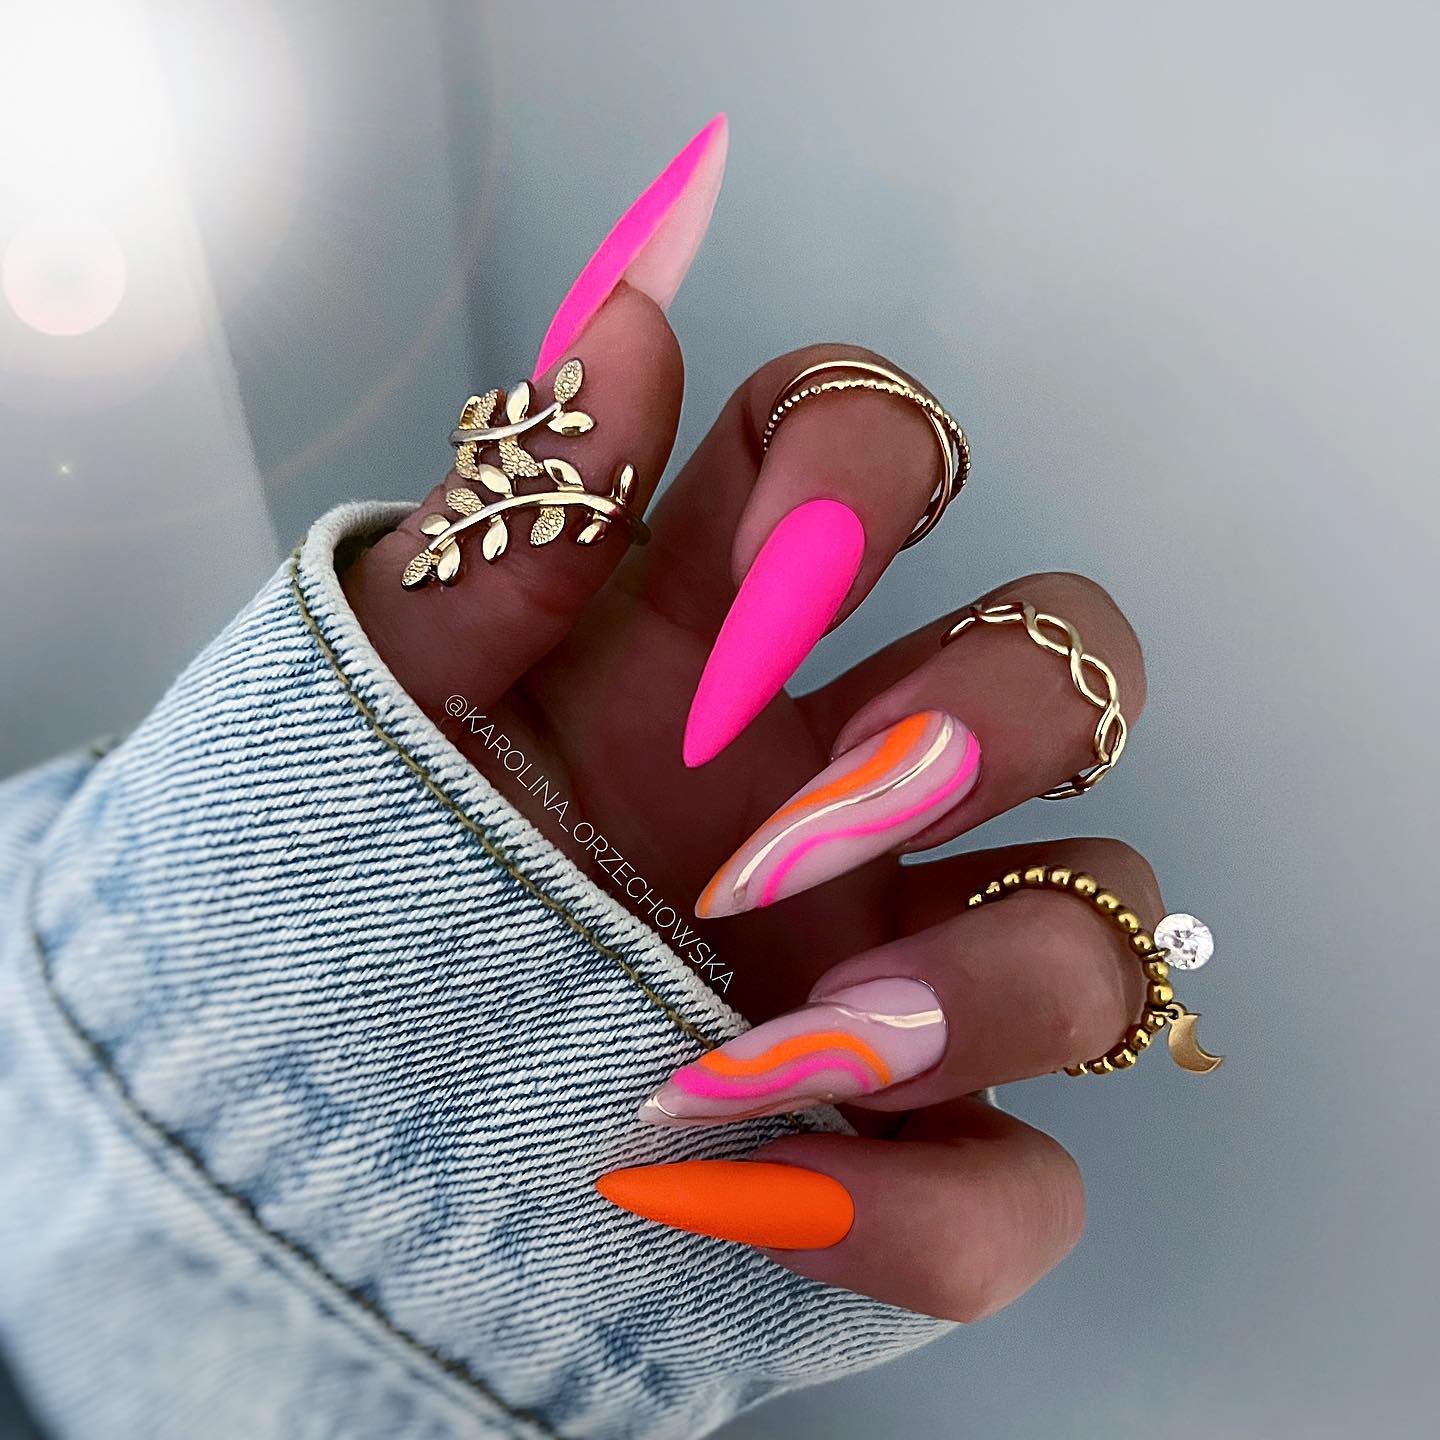 Bright Pink Stiletto Nails with Colorful Lines